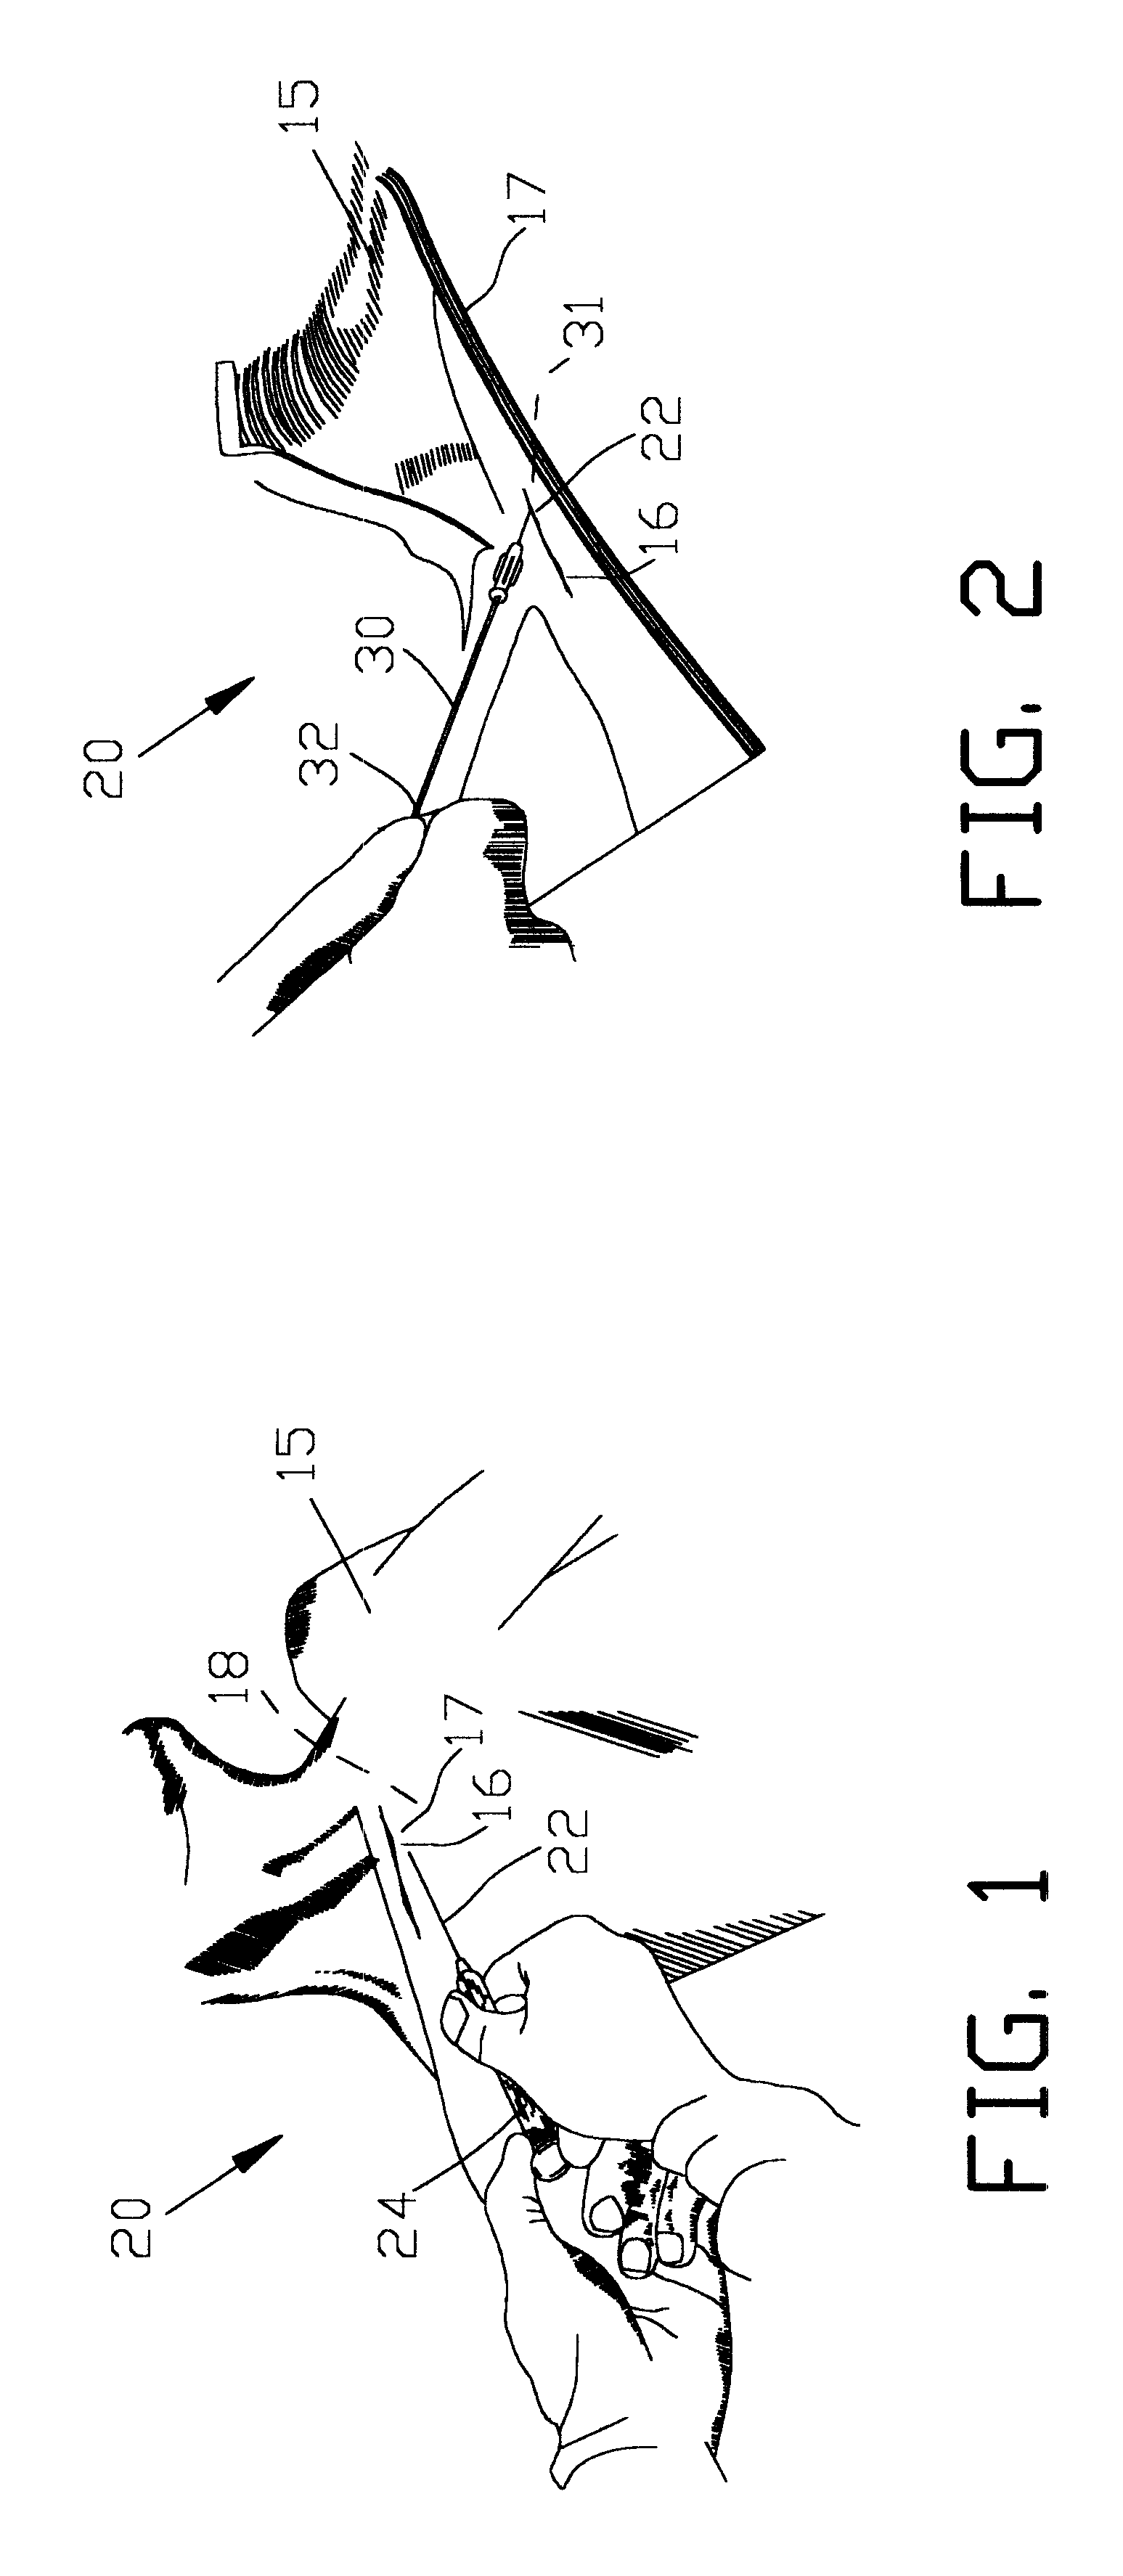 Apparatus for inserting medical device